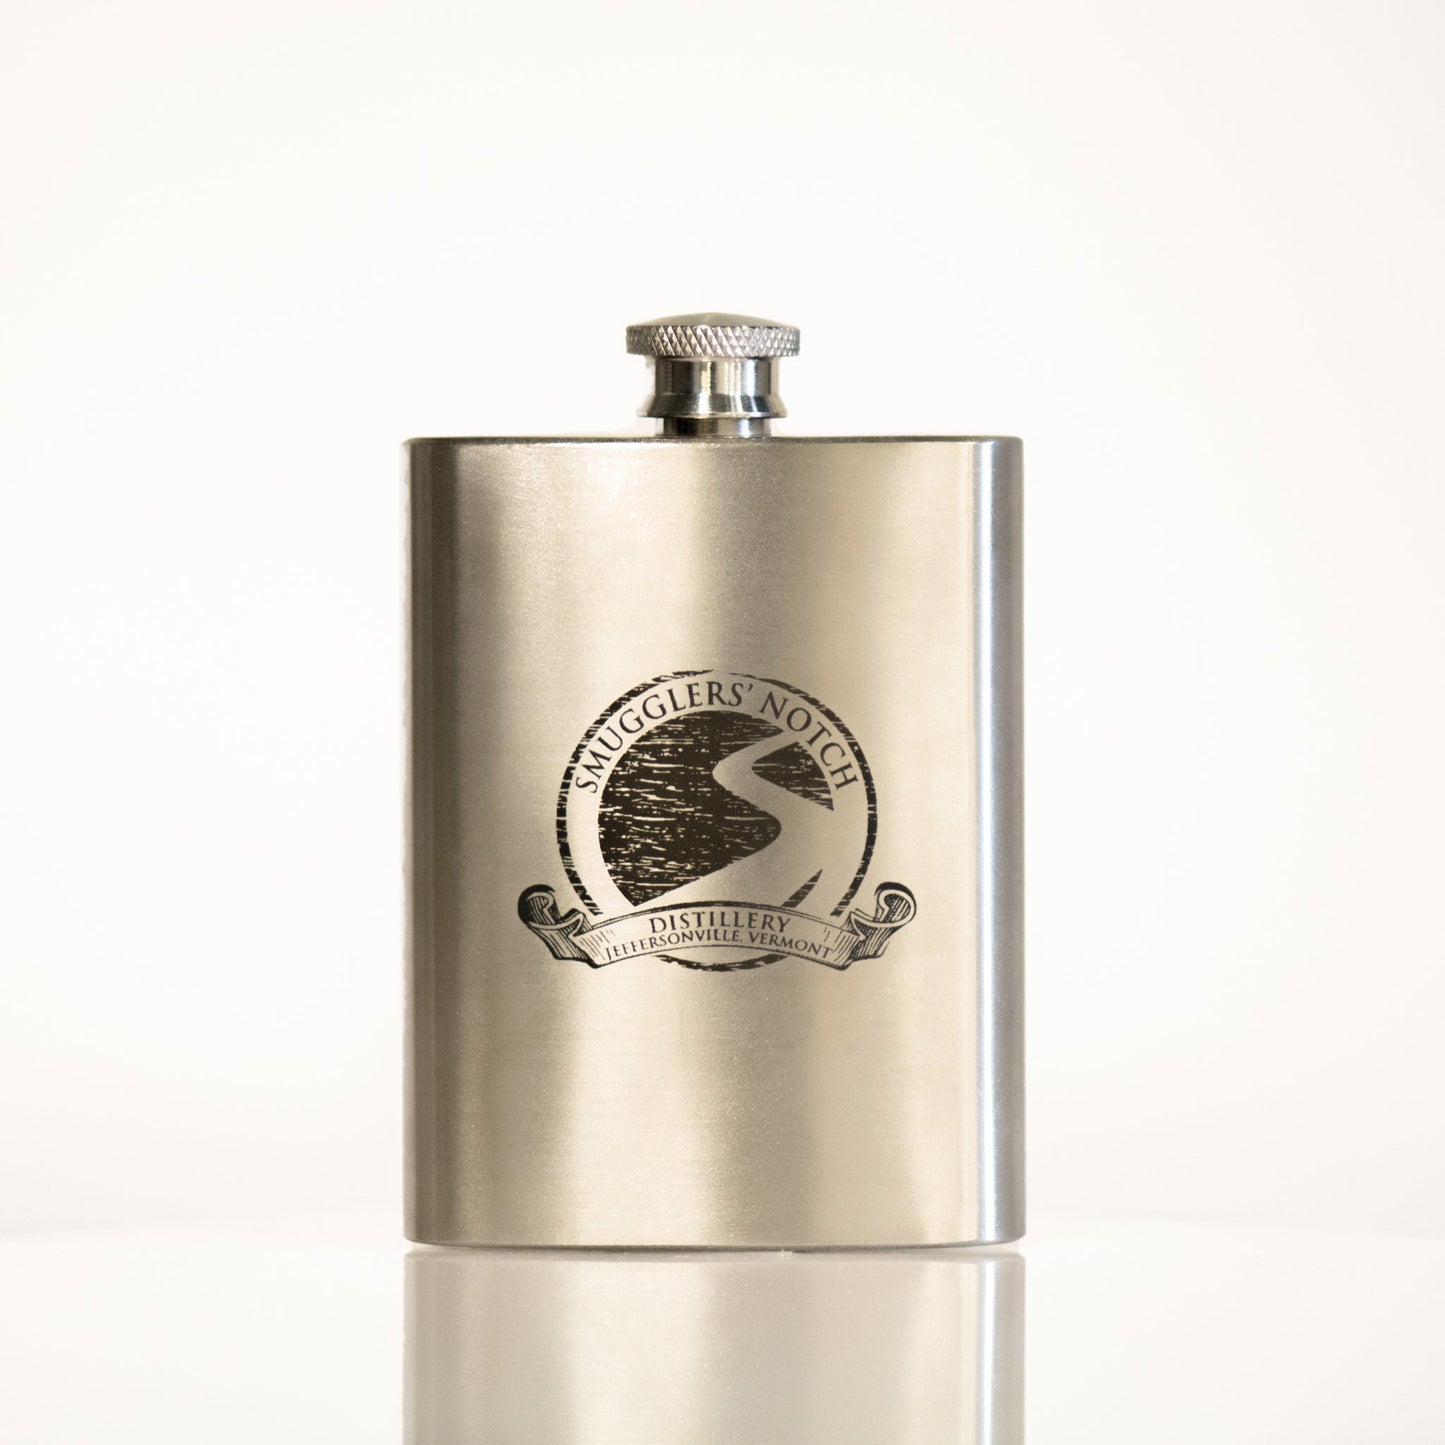 Classic Stainless Steel Hip Flask with Vintage Logo, 4 oz | Smugglers' Notch Distillery Online Store